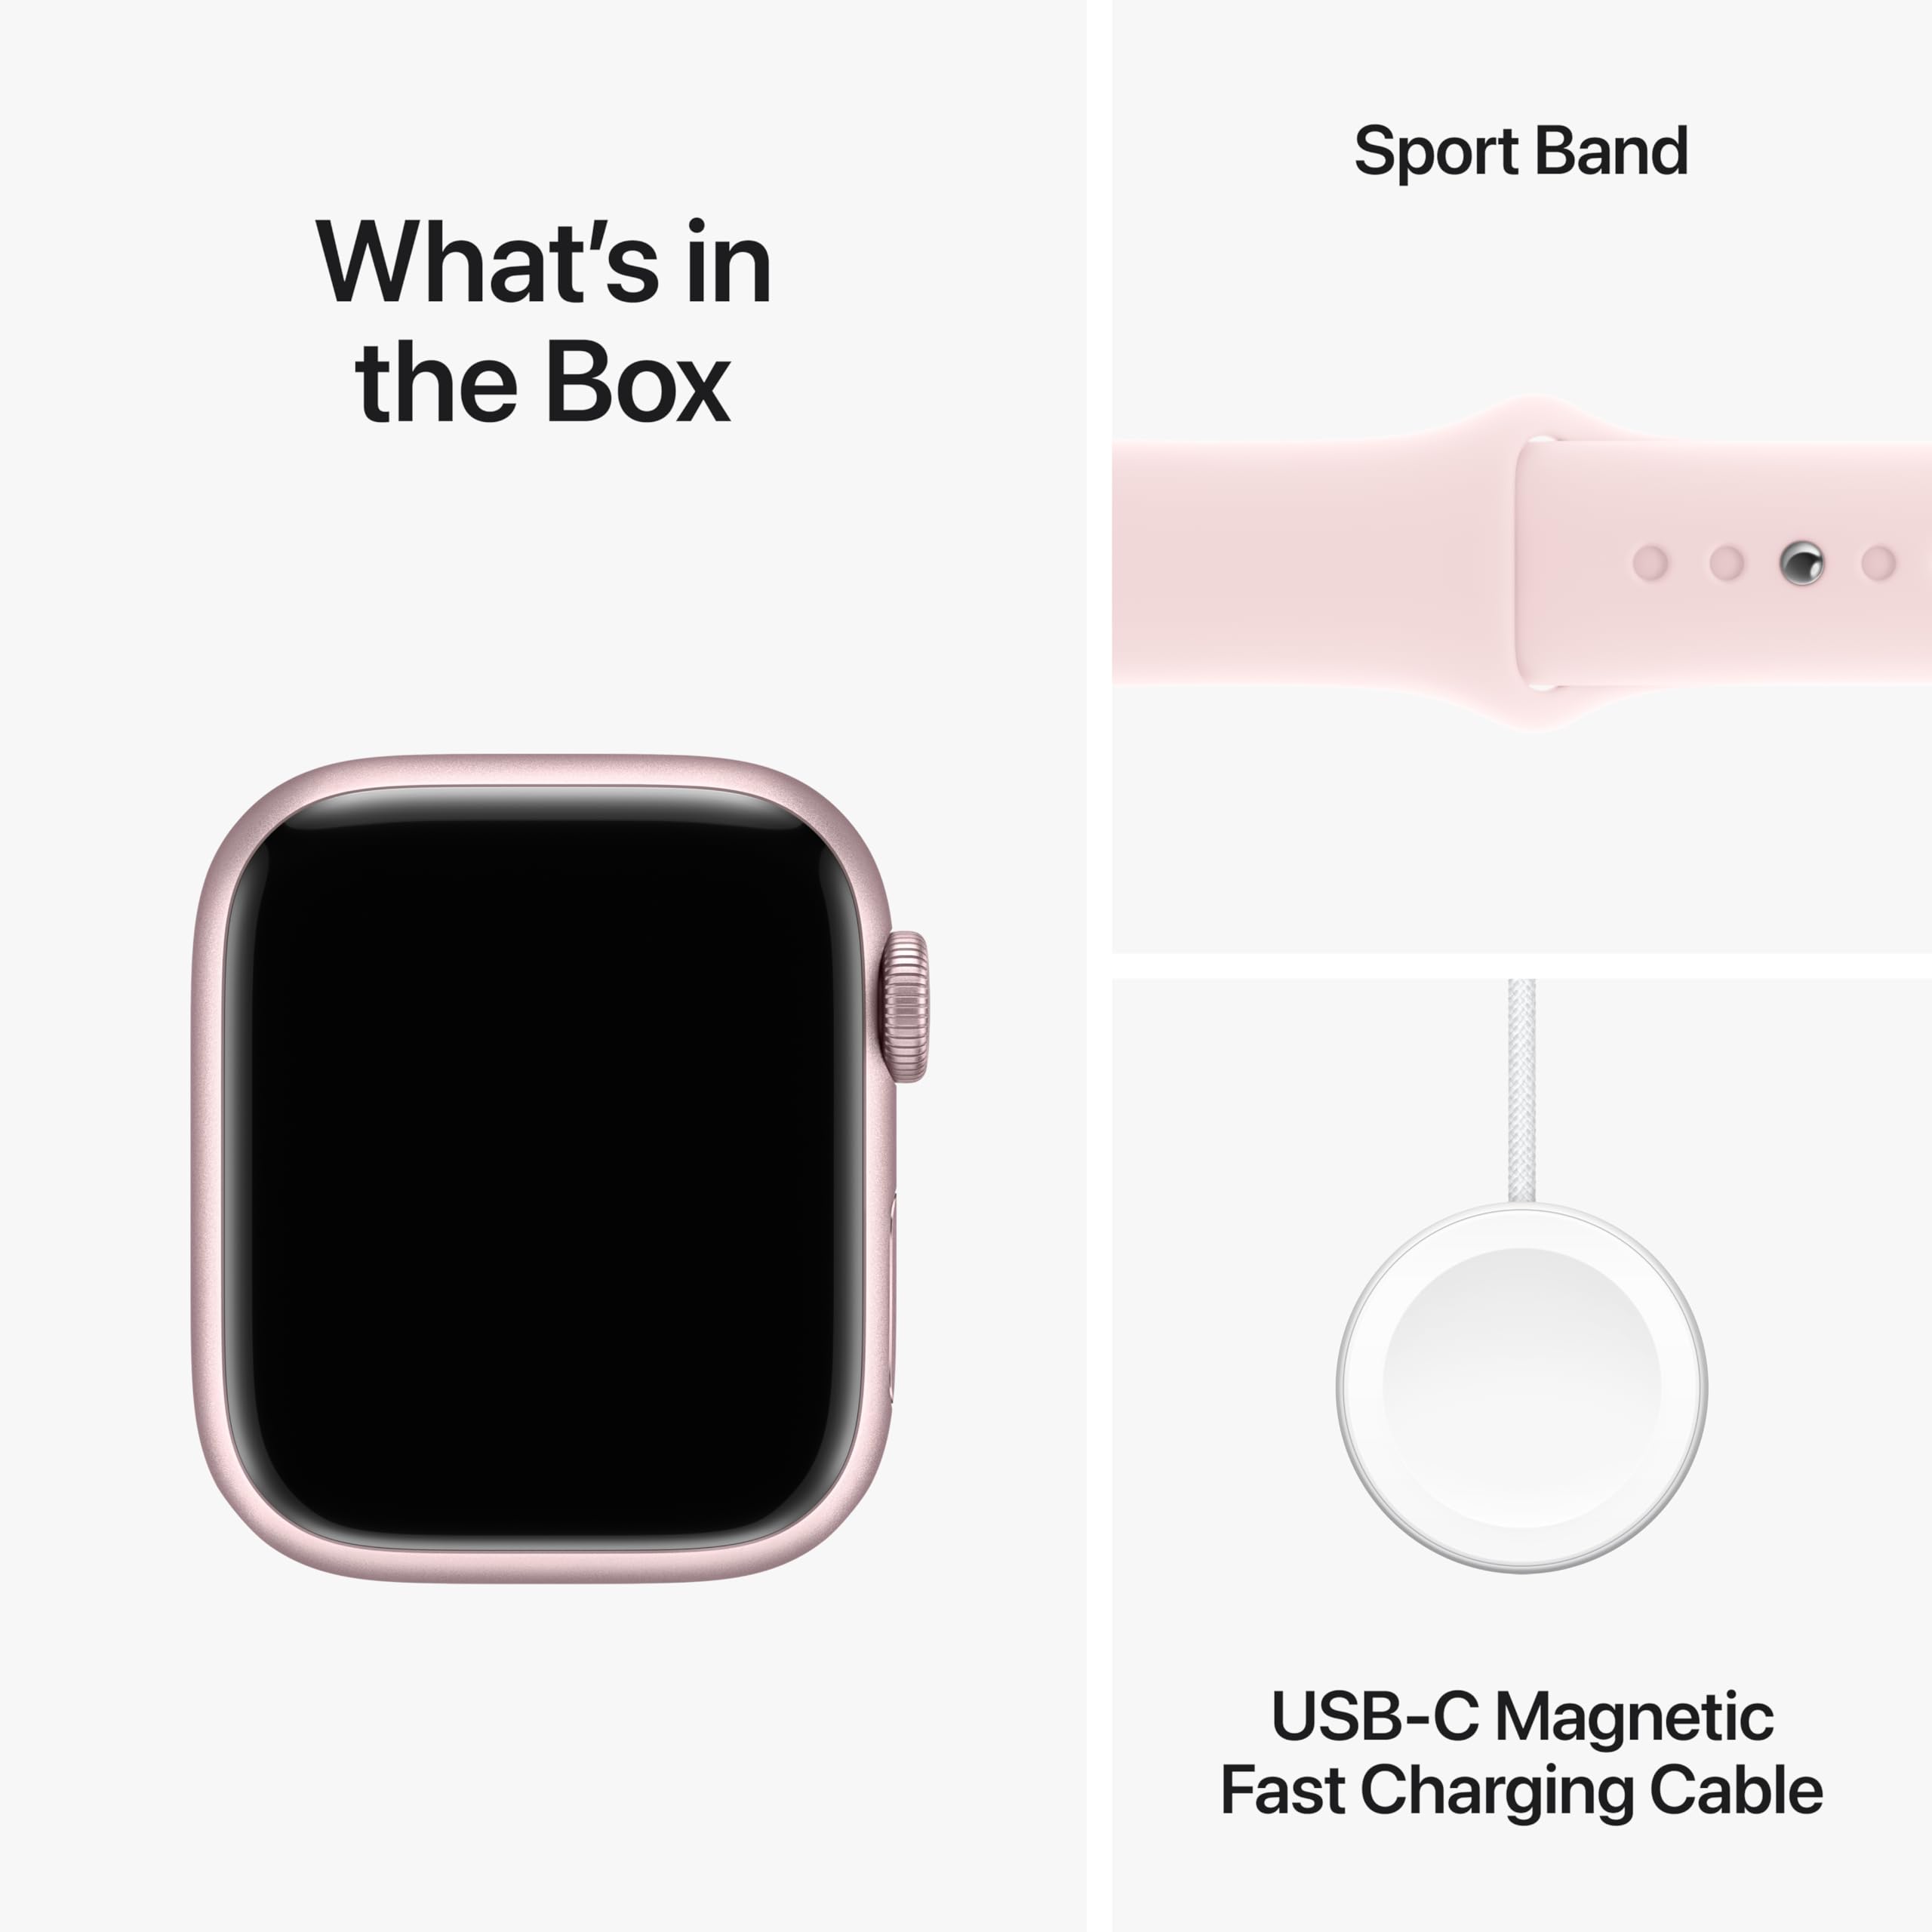 Apple Watch Series 9 [GPS 41mm] Smartwatch with Pink Aluminum Case with Pink Sport Band M/L. Fitness Tracker, Blood Oxygen & ECG Apps, Always-On Retina Display